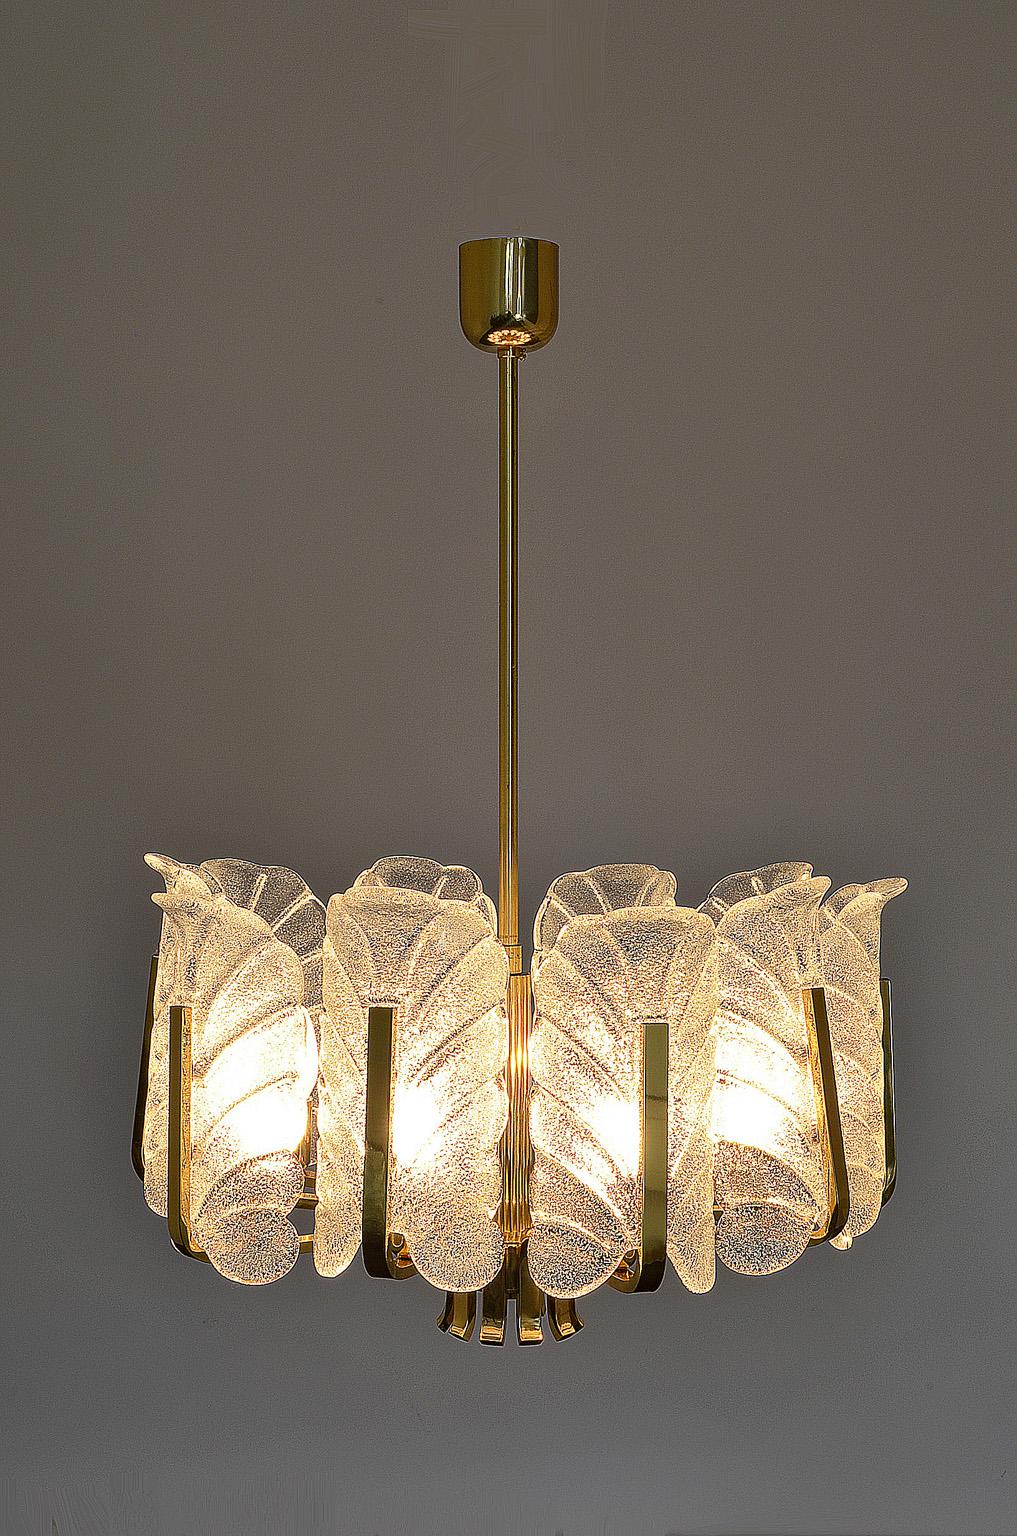 This large chandelier features ten decorative glass acanthus leaves and was designed by Carl Fagerlund for Orrefors in the 1960s.